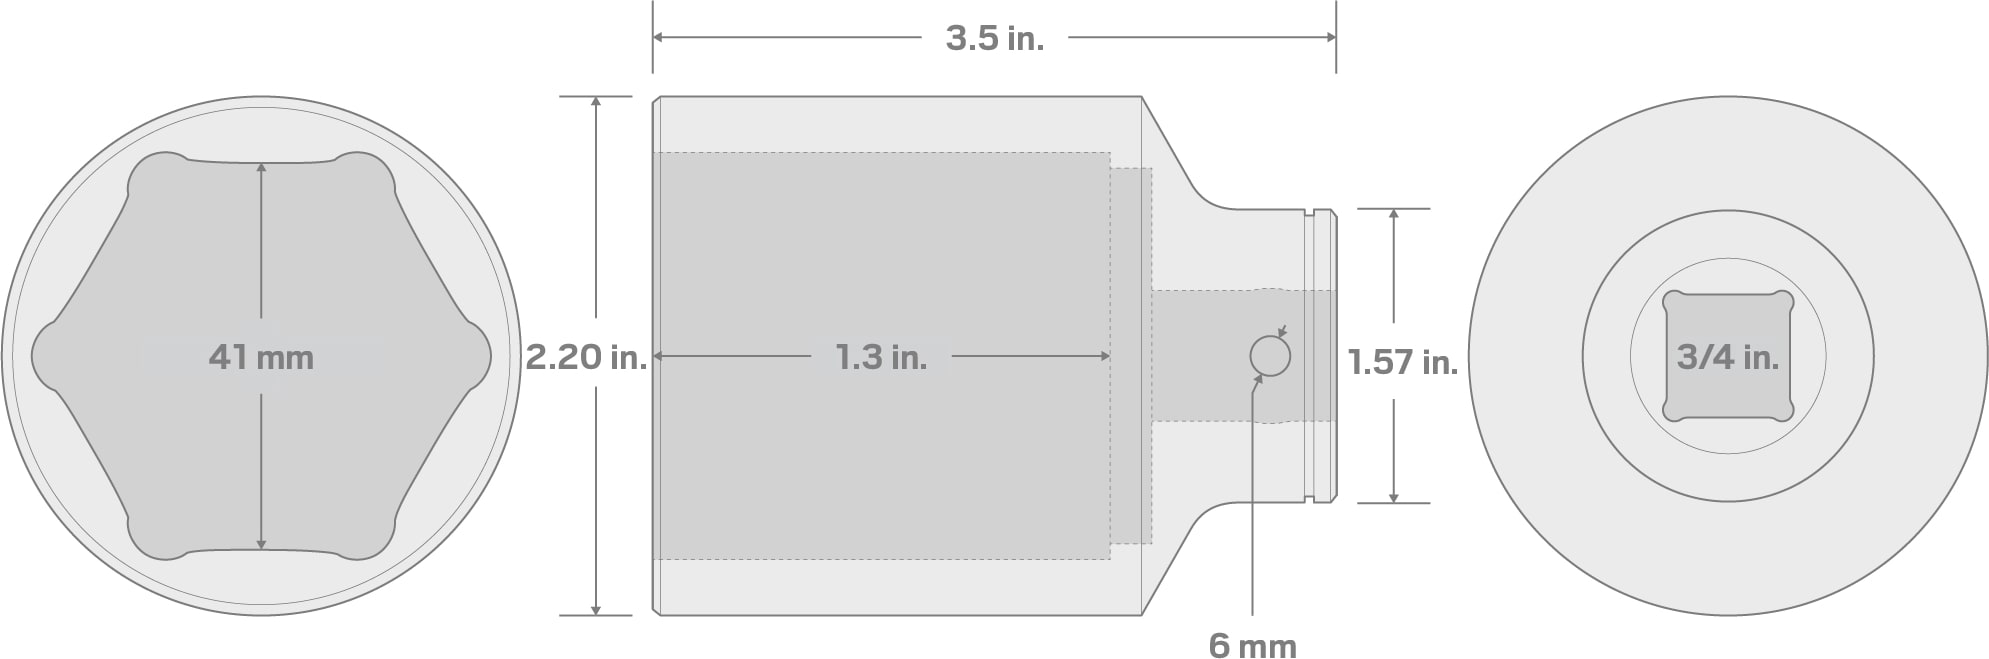 Specs for 3/4 Inch Drive x 41 mm Deep 6-Point Socket